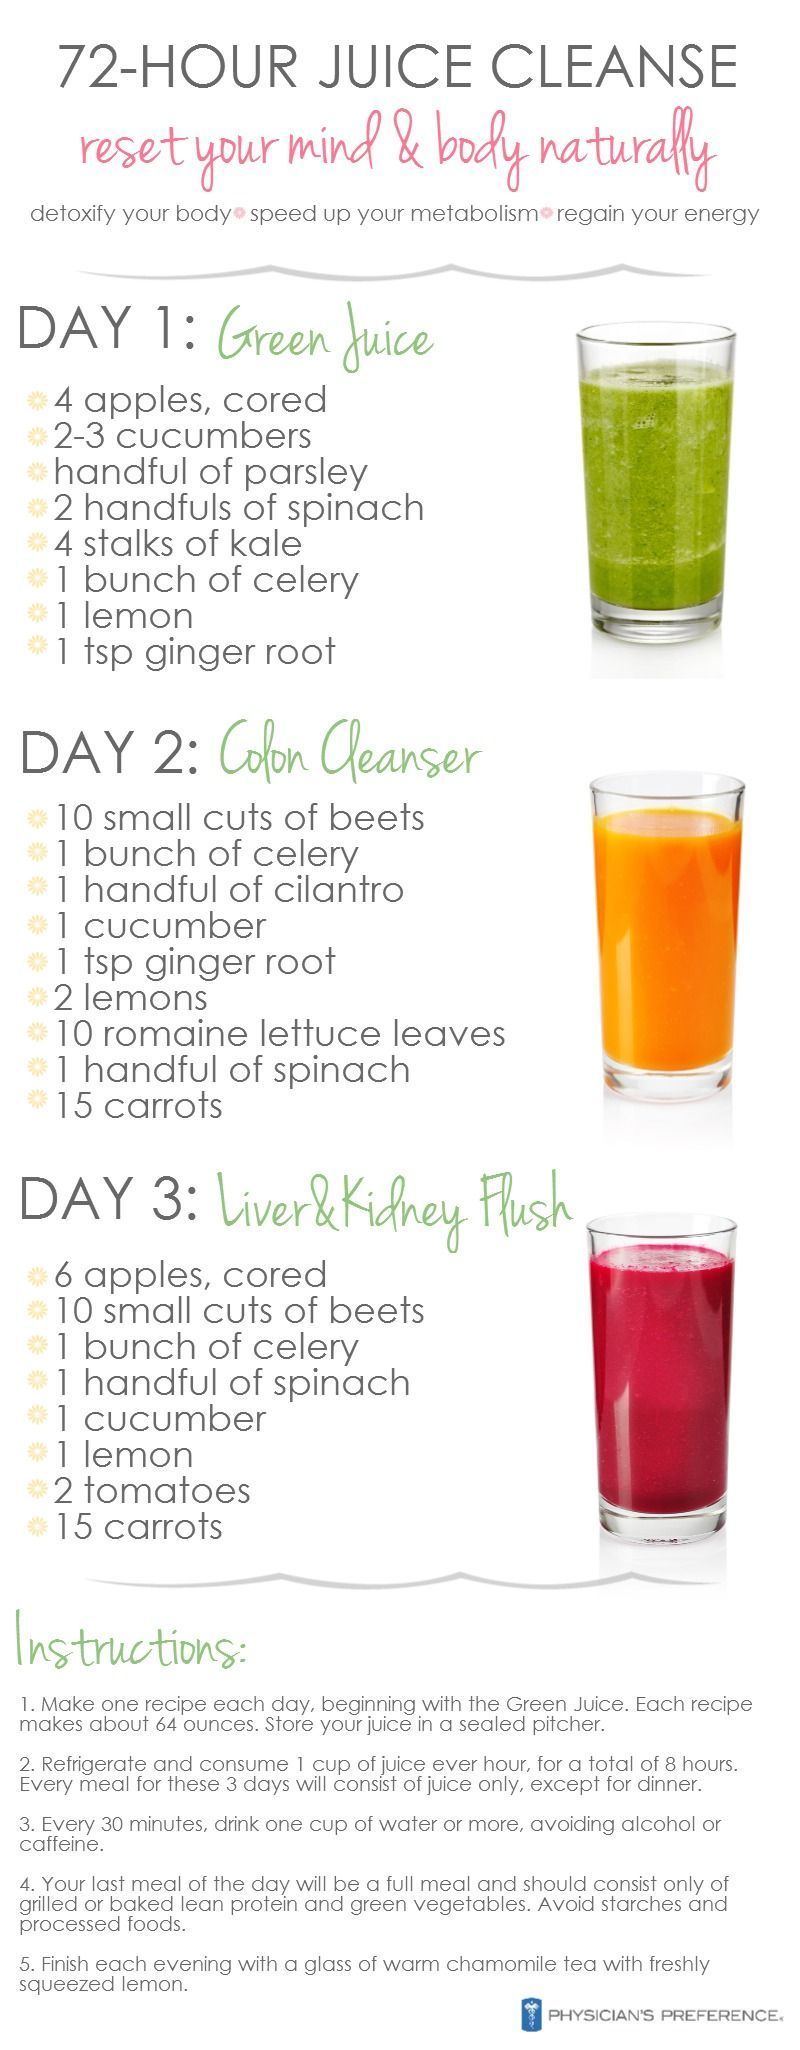 A Good Hue: 3-Day DIY Juice Cleanse